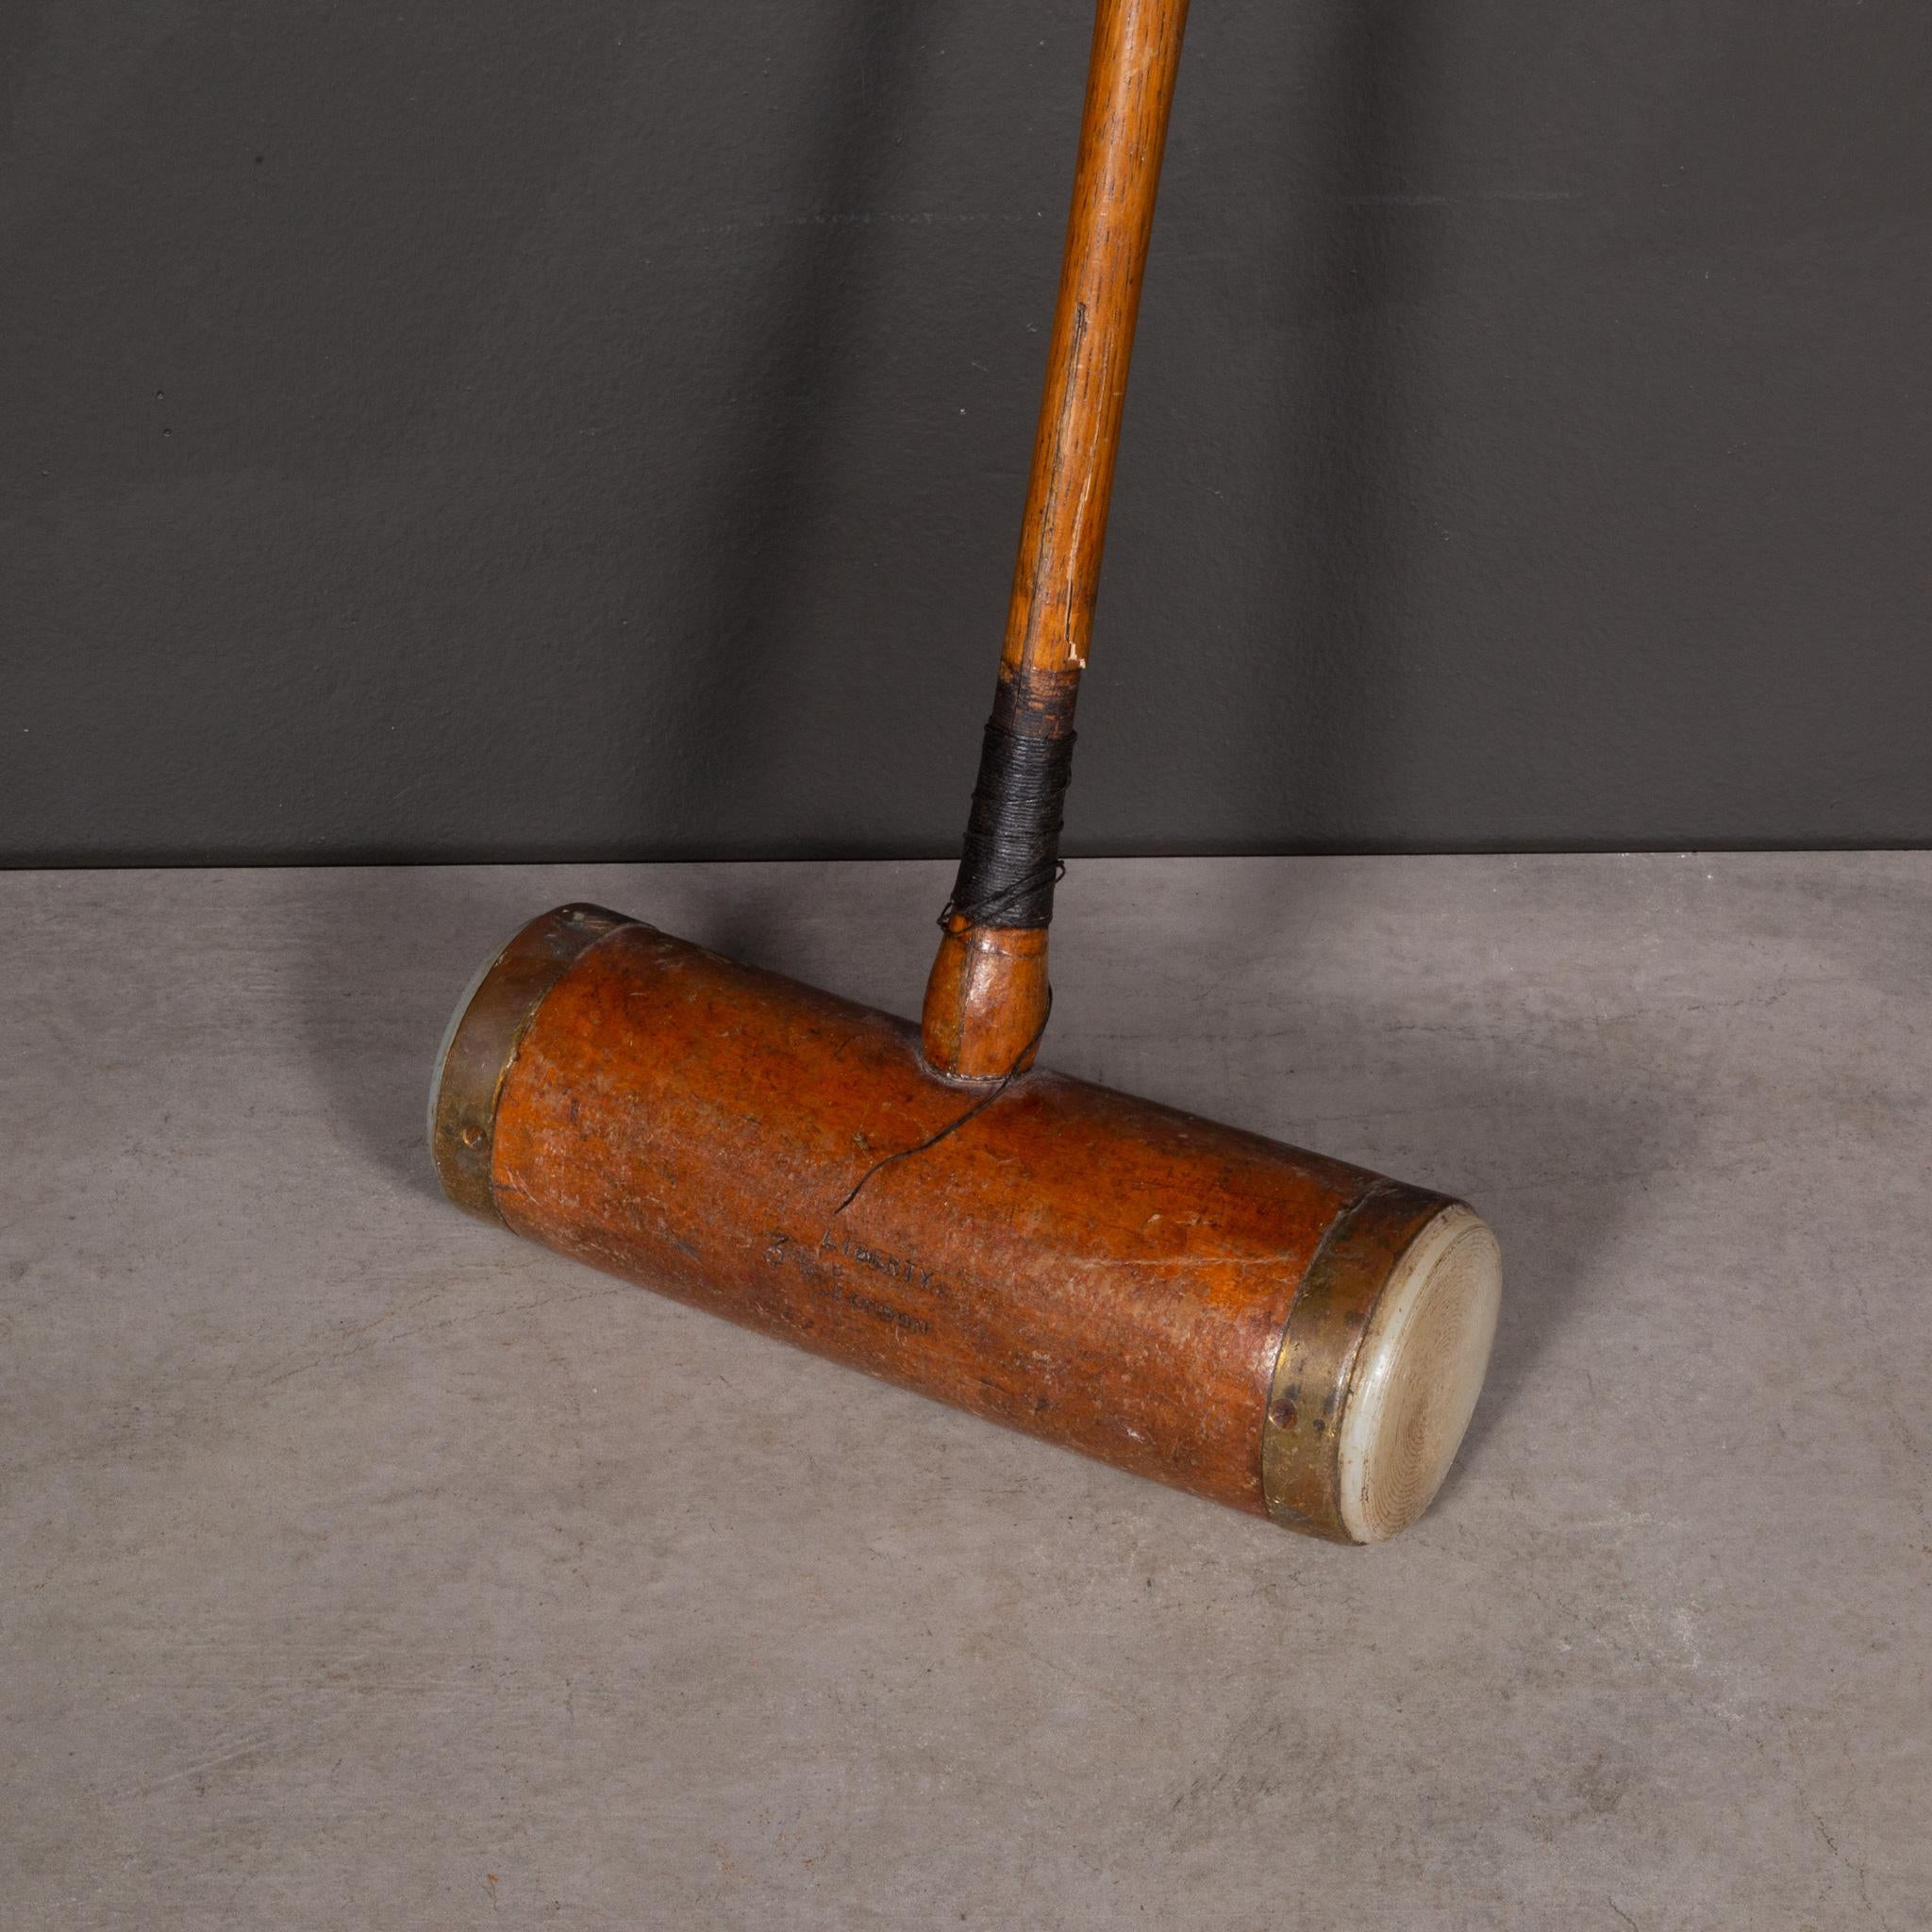 ABOUT

A brass and wood British croquet mallet engraved with 